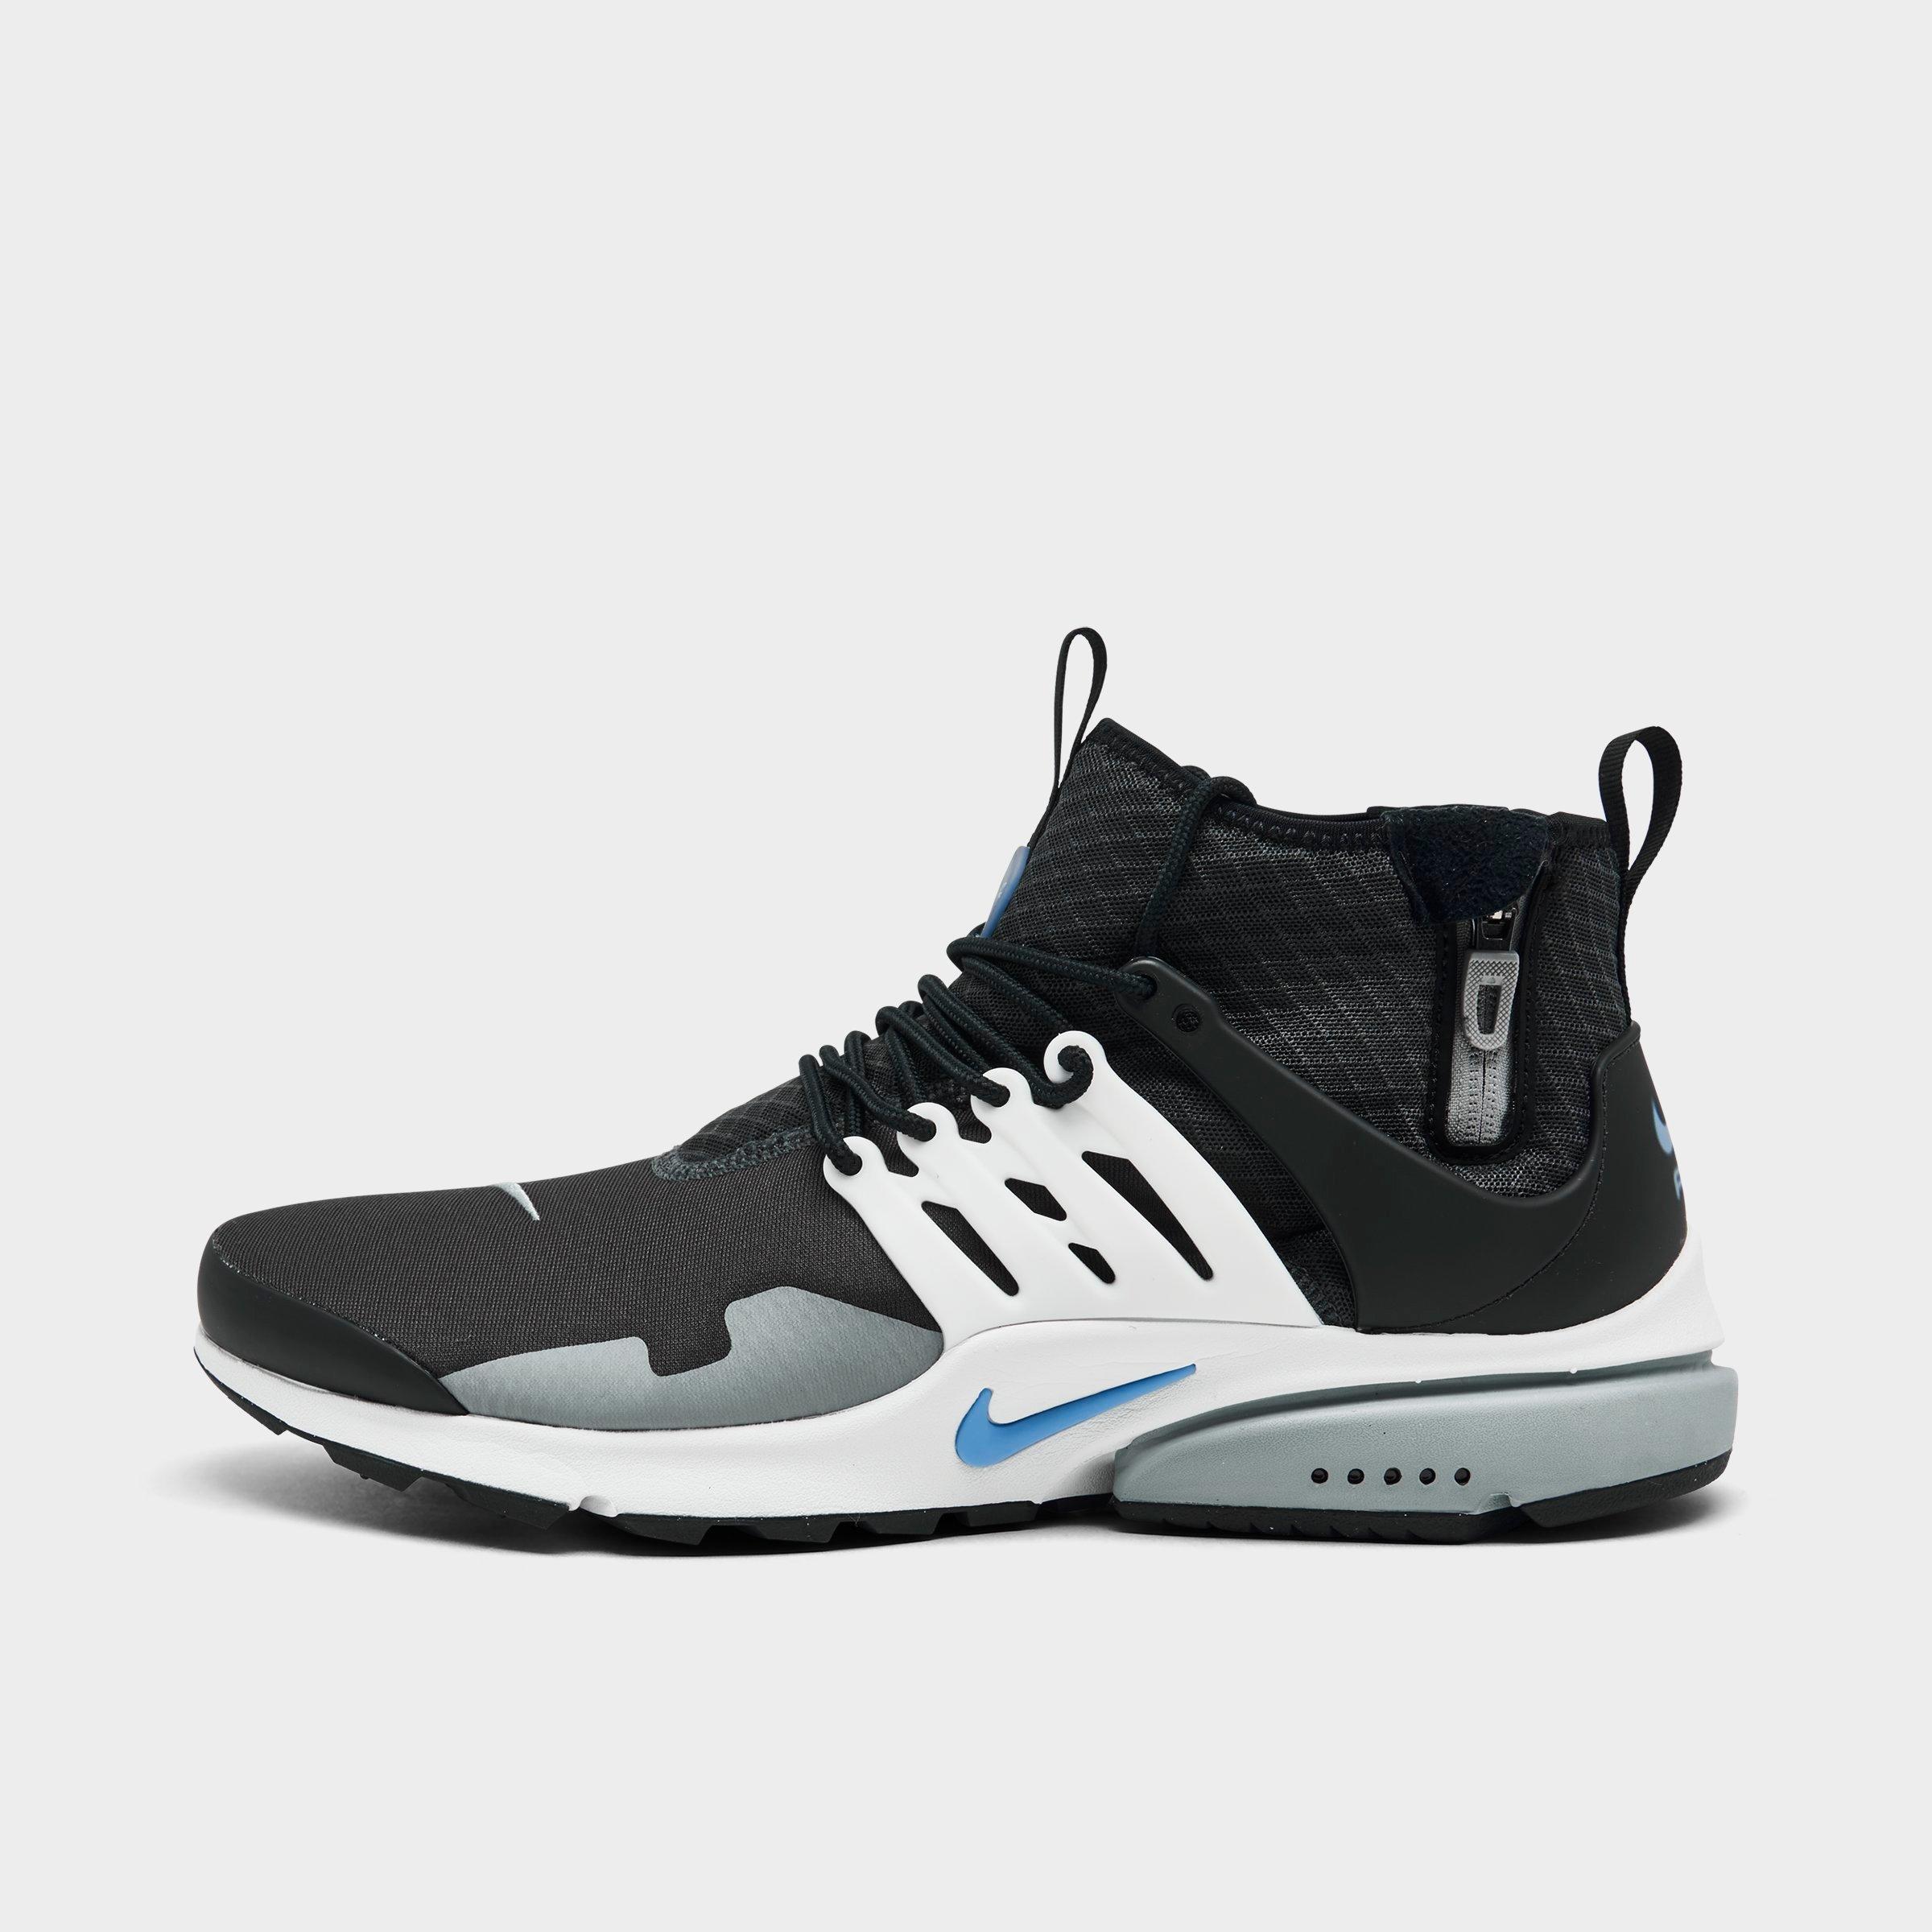 Nike Men's Air Presto Mid Utility Casual Shoes In Anthracite/university Blue/summit White